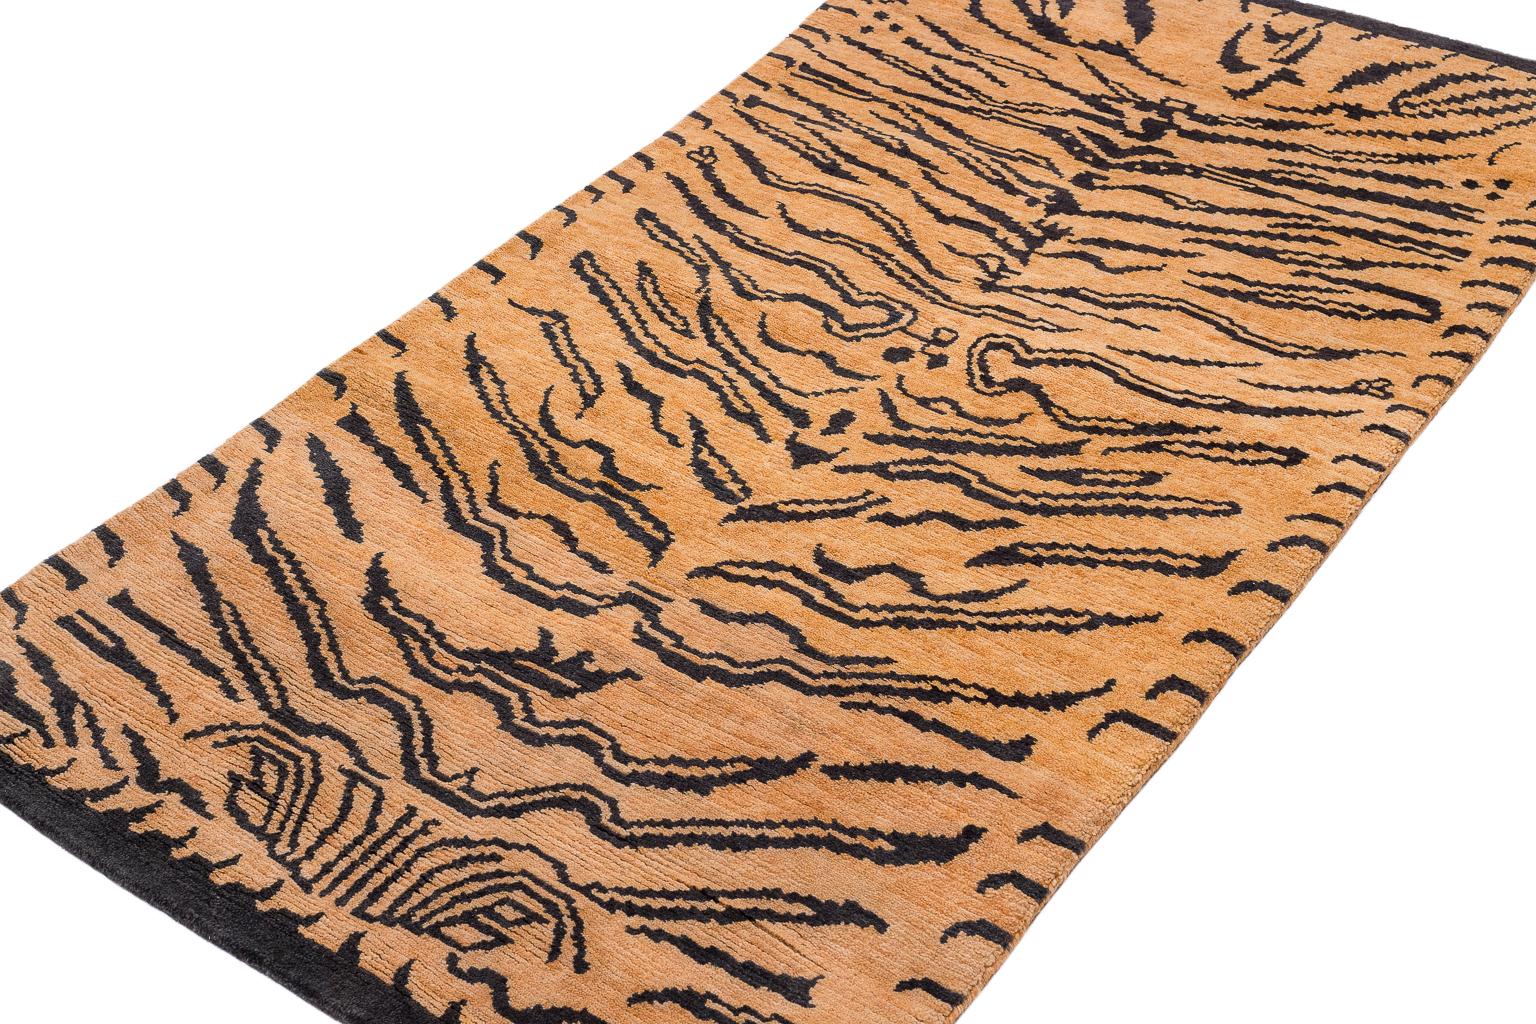 This tiger carpet is a fresh take on an original Joseph Carini design. It has a textured weave - a Devi weave, 60 Knot. It is 100 % wool, hand-spun, and handwoven in Nepal. The abstract animal print is bold but not overwhelmingly so. Measures: 3' x